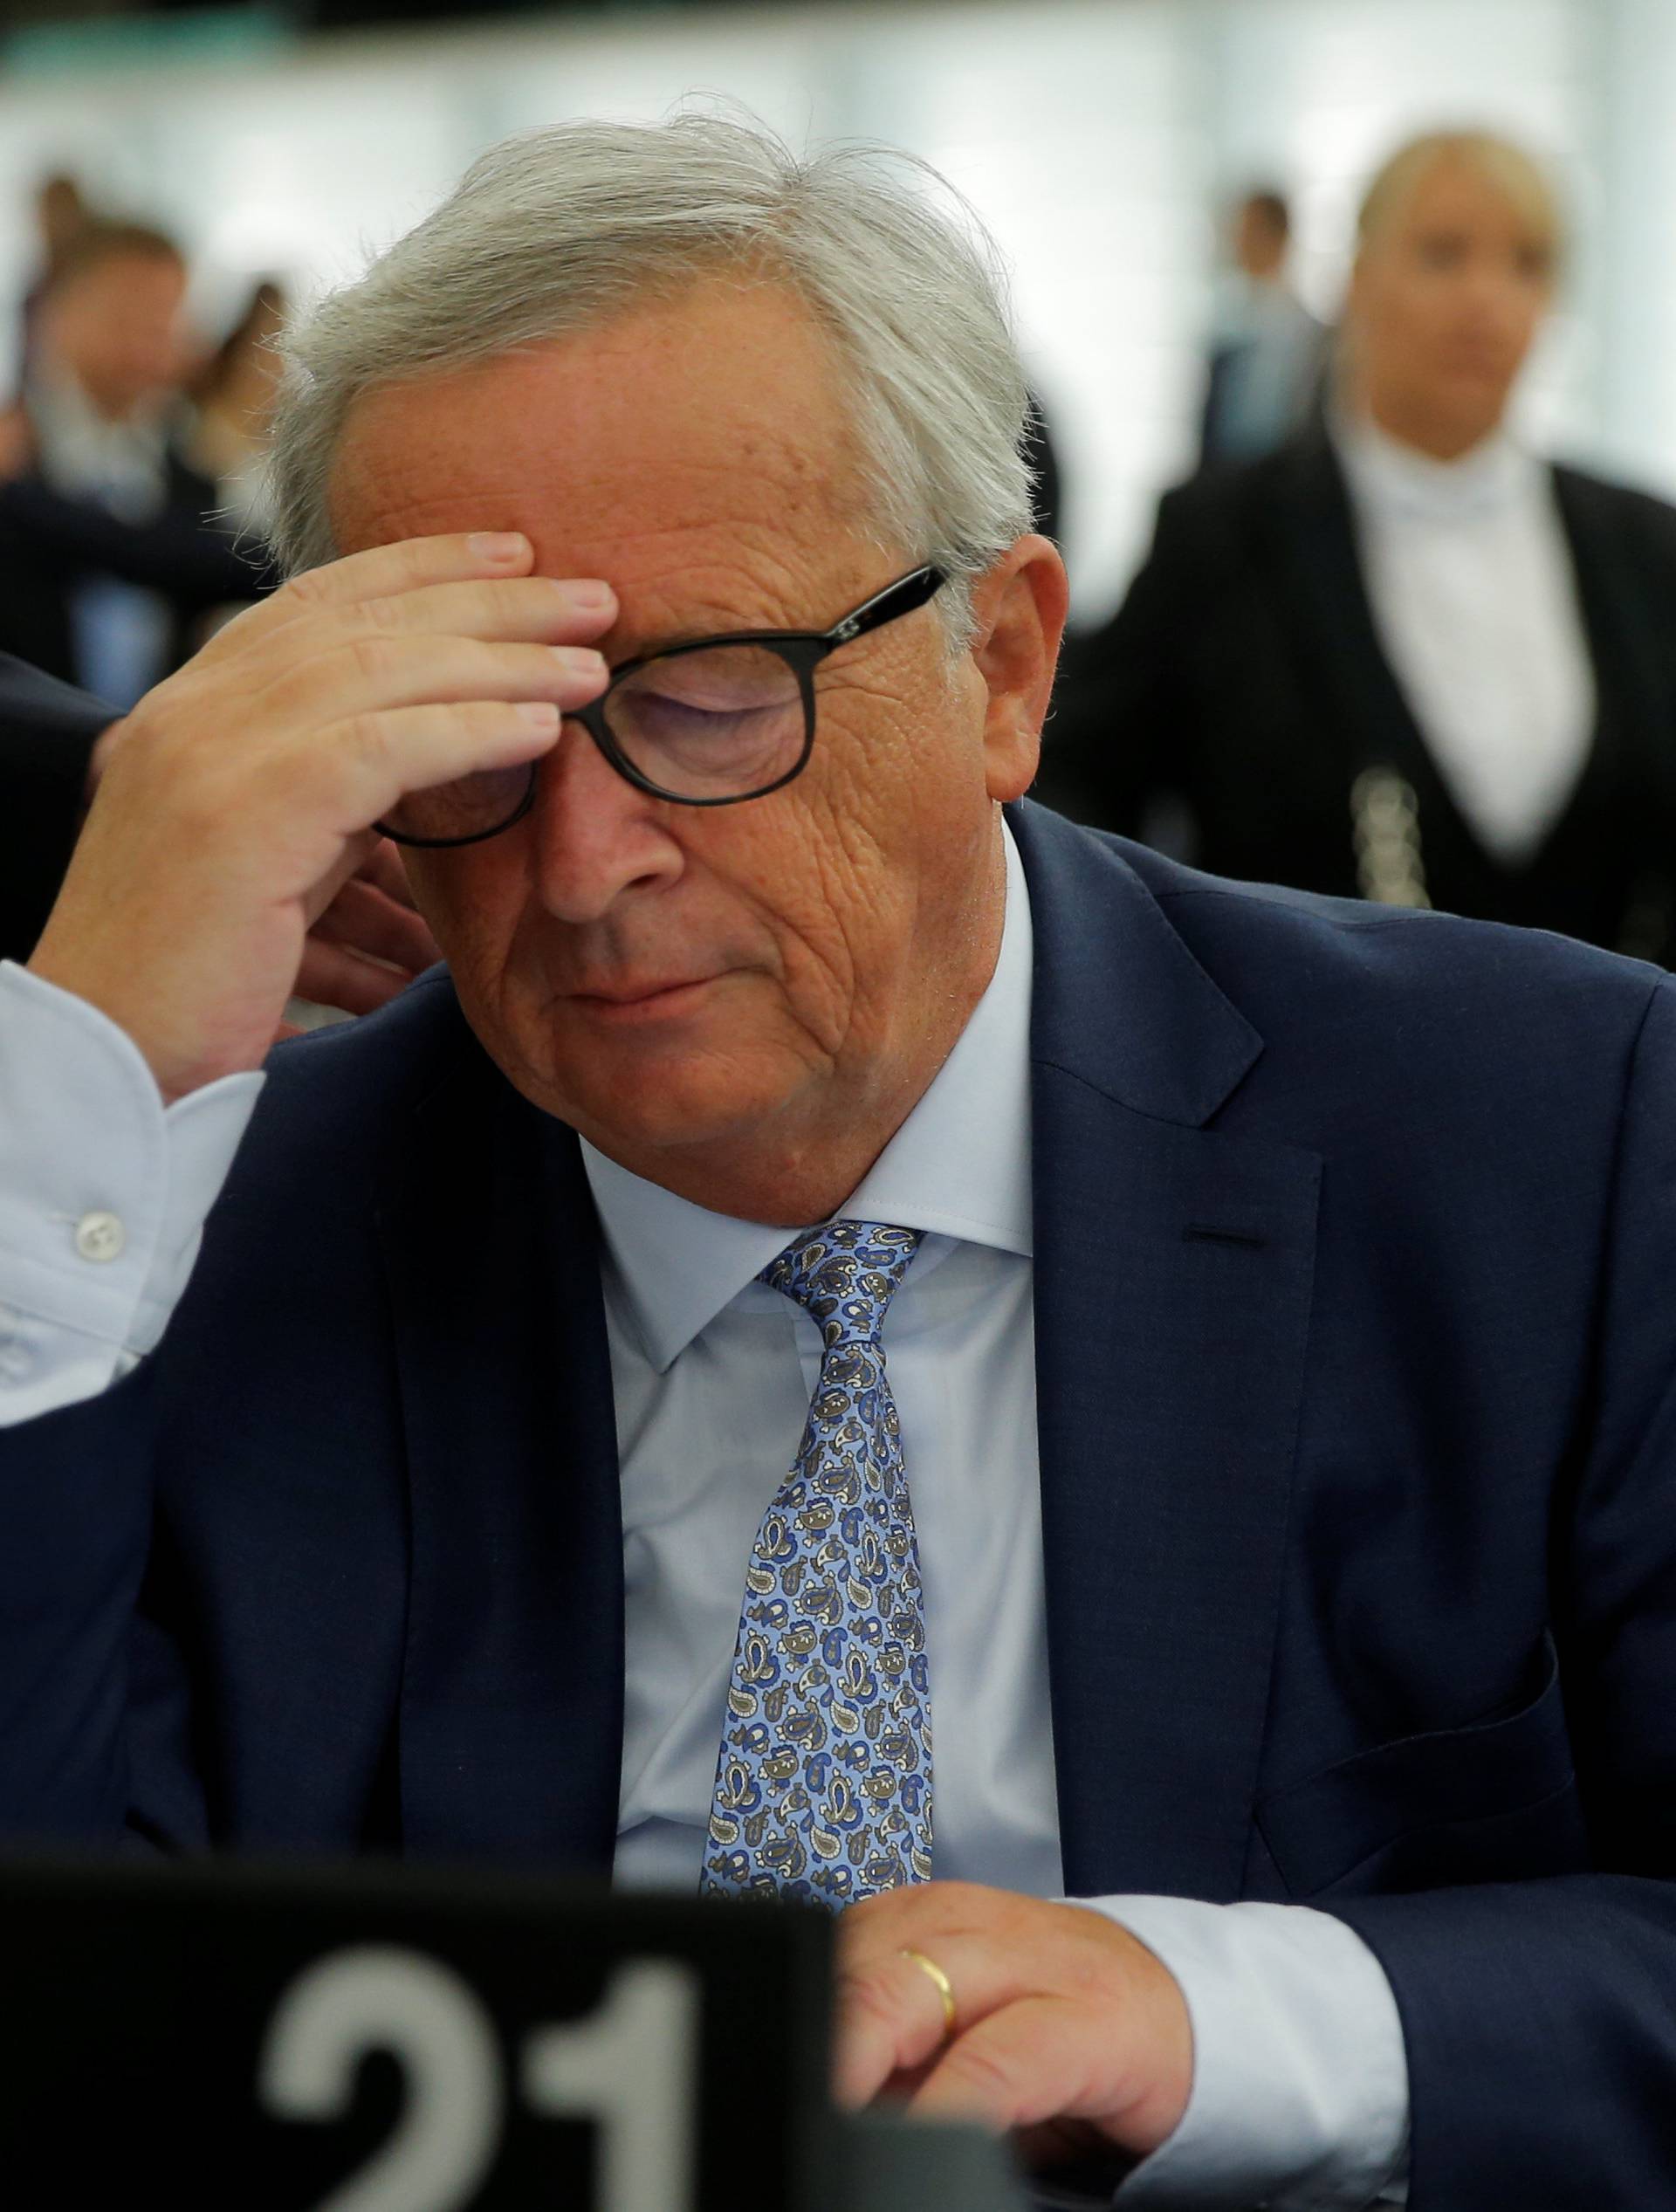 European Commission President Juncker reacts before a debate on The State of the European Union at the European Parliament in Strasbourg